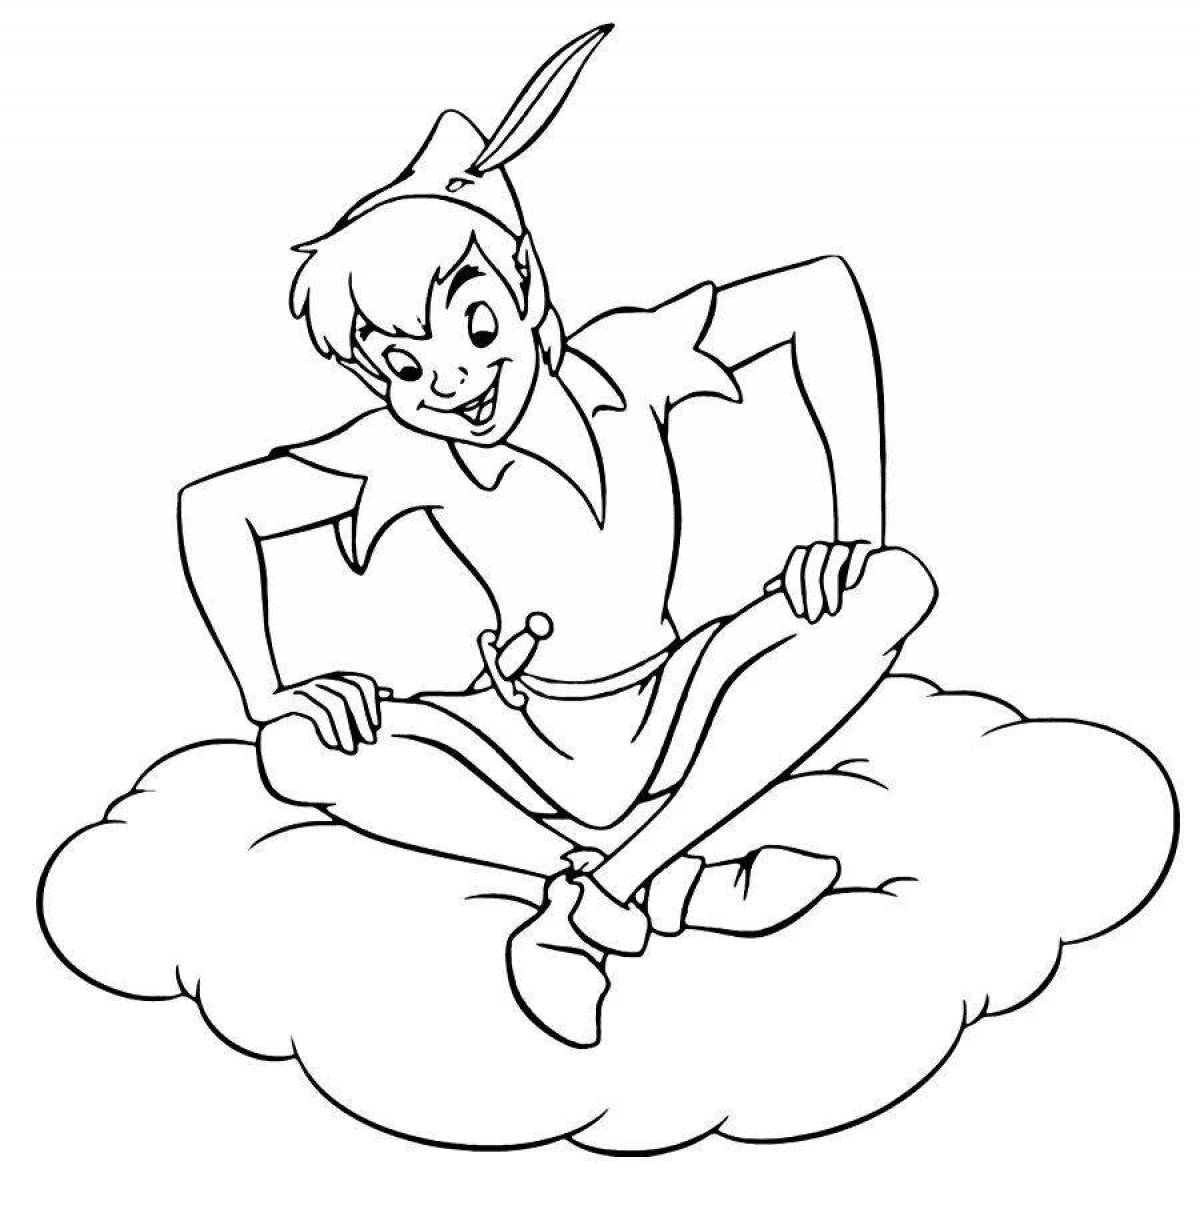 Sparkling peter pan coloring page